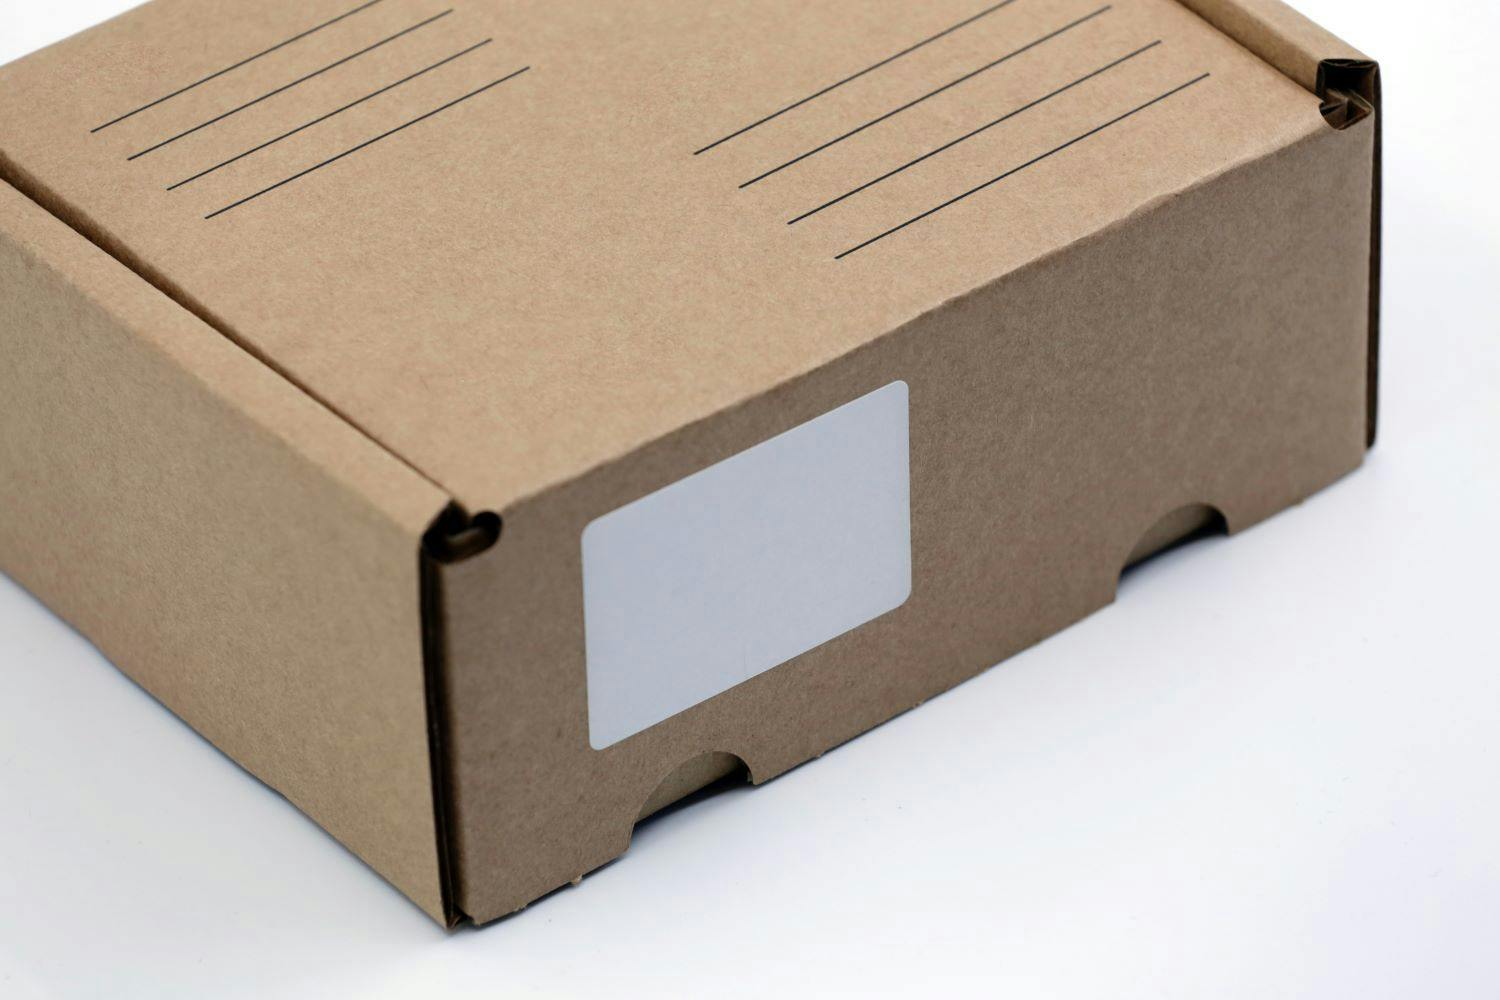 Box with blank label on white background